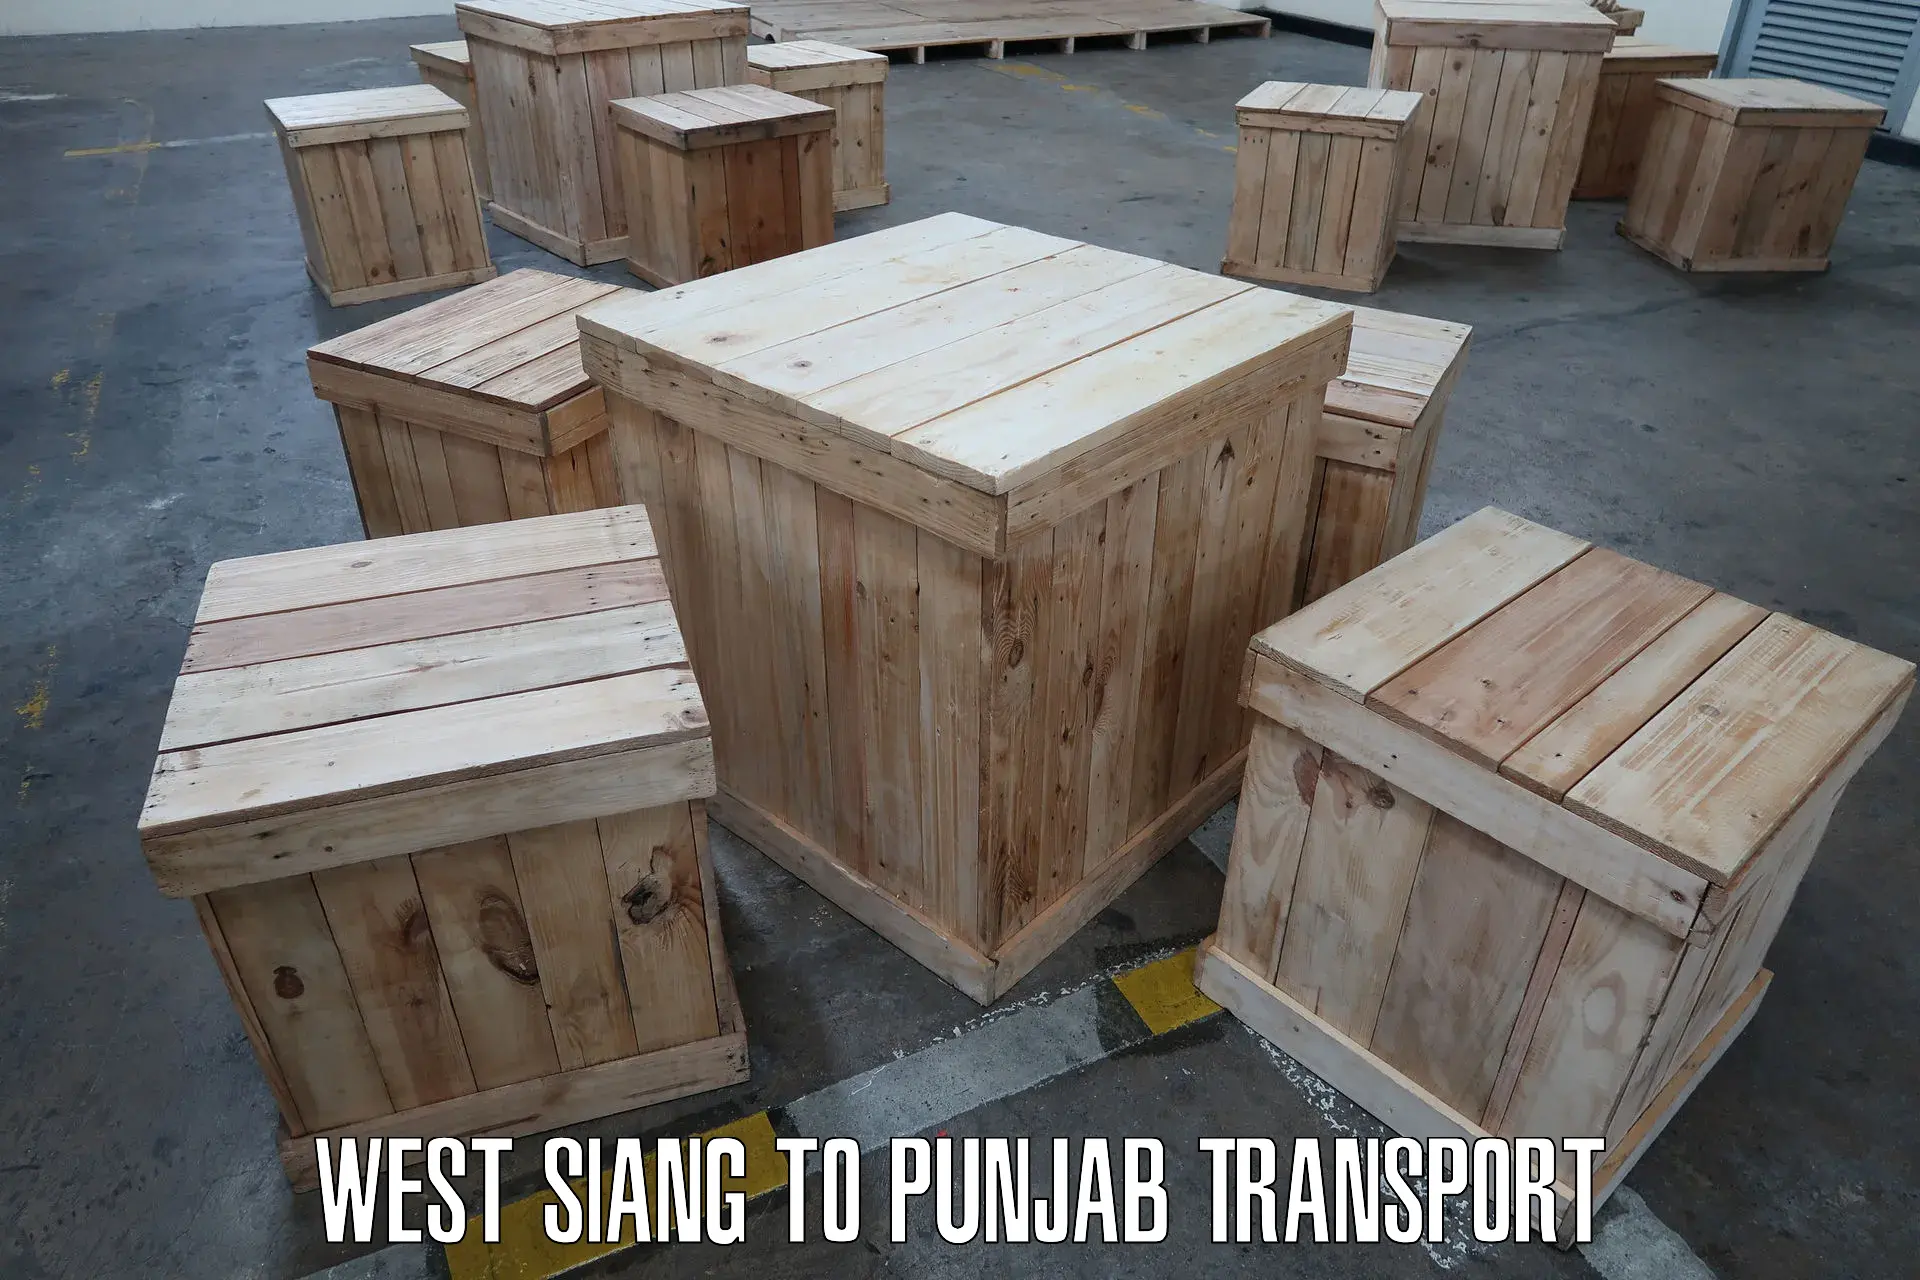 Parcel transport services West Siang to Ludhiana